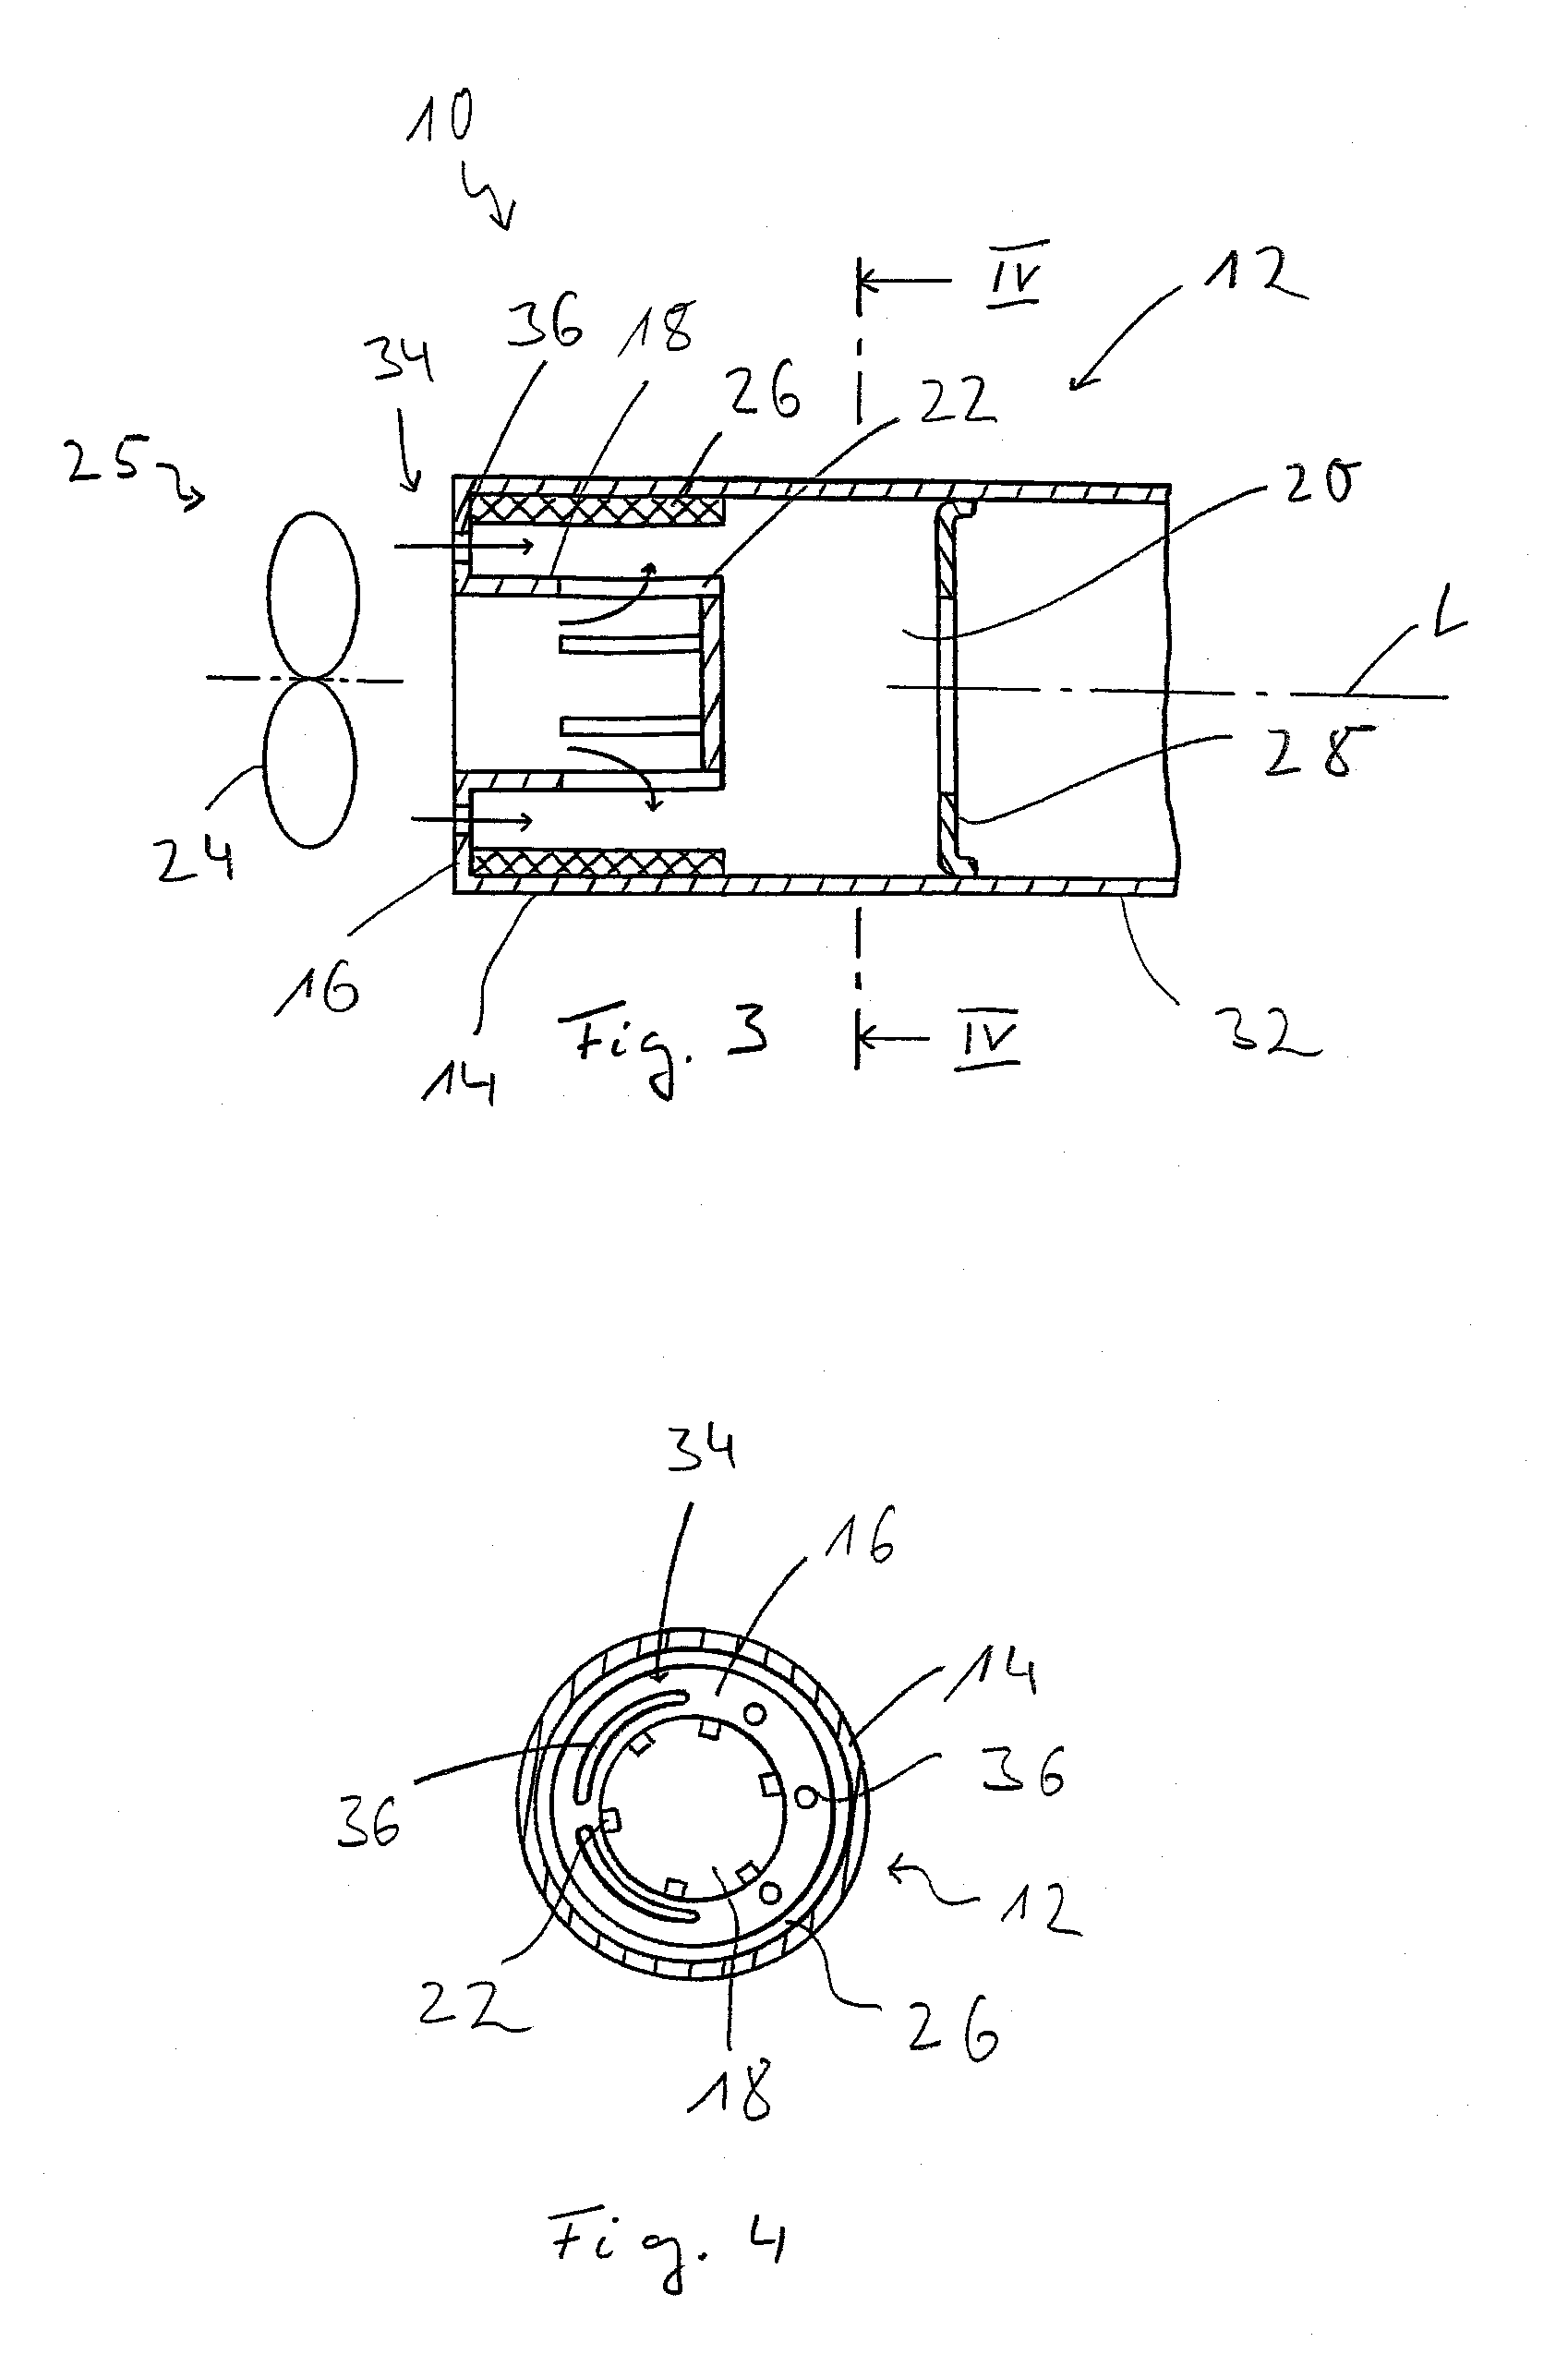 Evaporator assembly unit, especially for a vehicle heater or a reformer arrangement of a fuel cell system